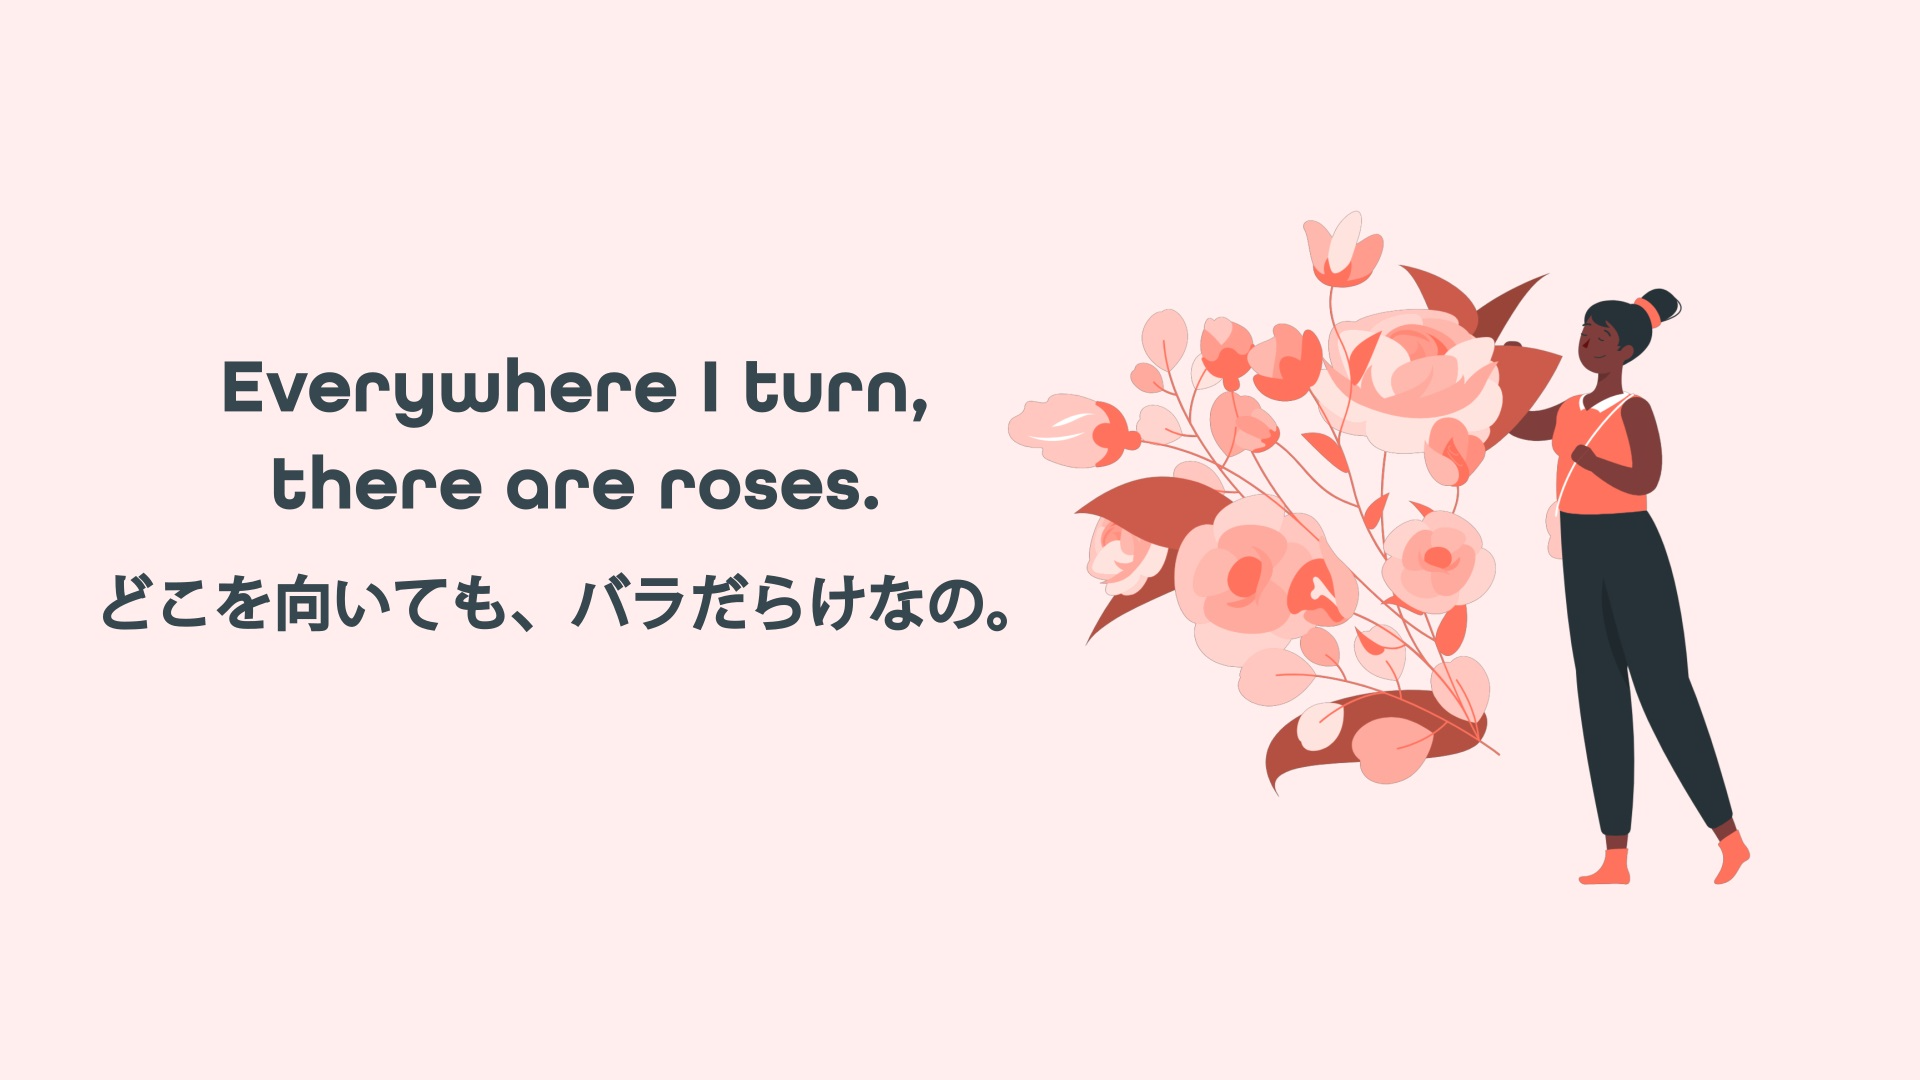 Everything’s coming up rosesの意味